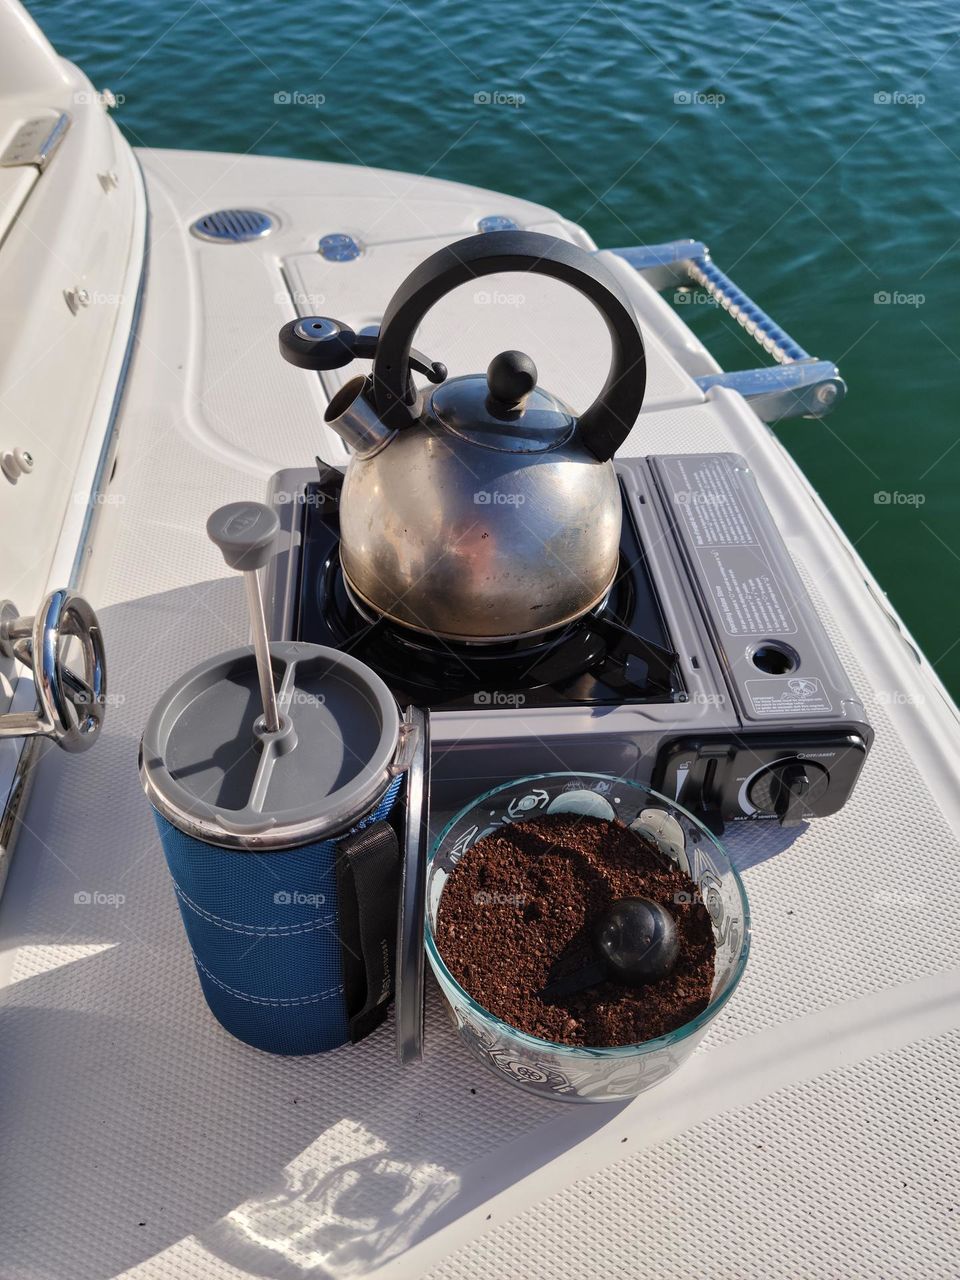 How a Coffee Addict Handles Boating